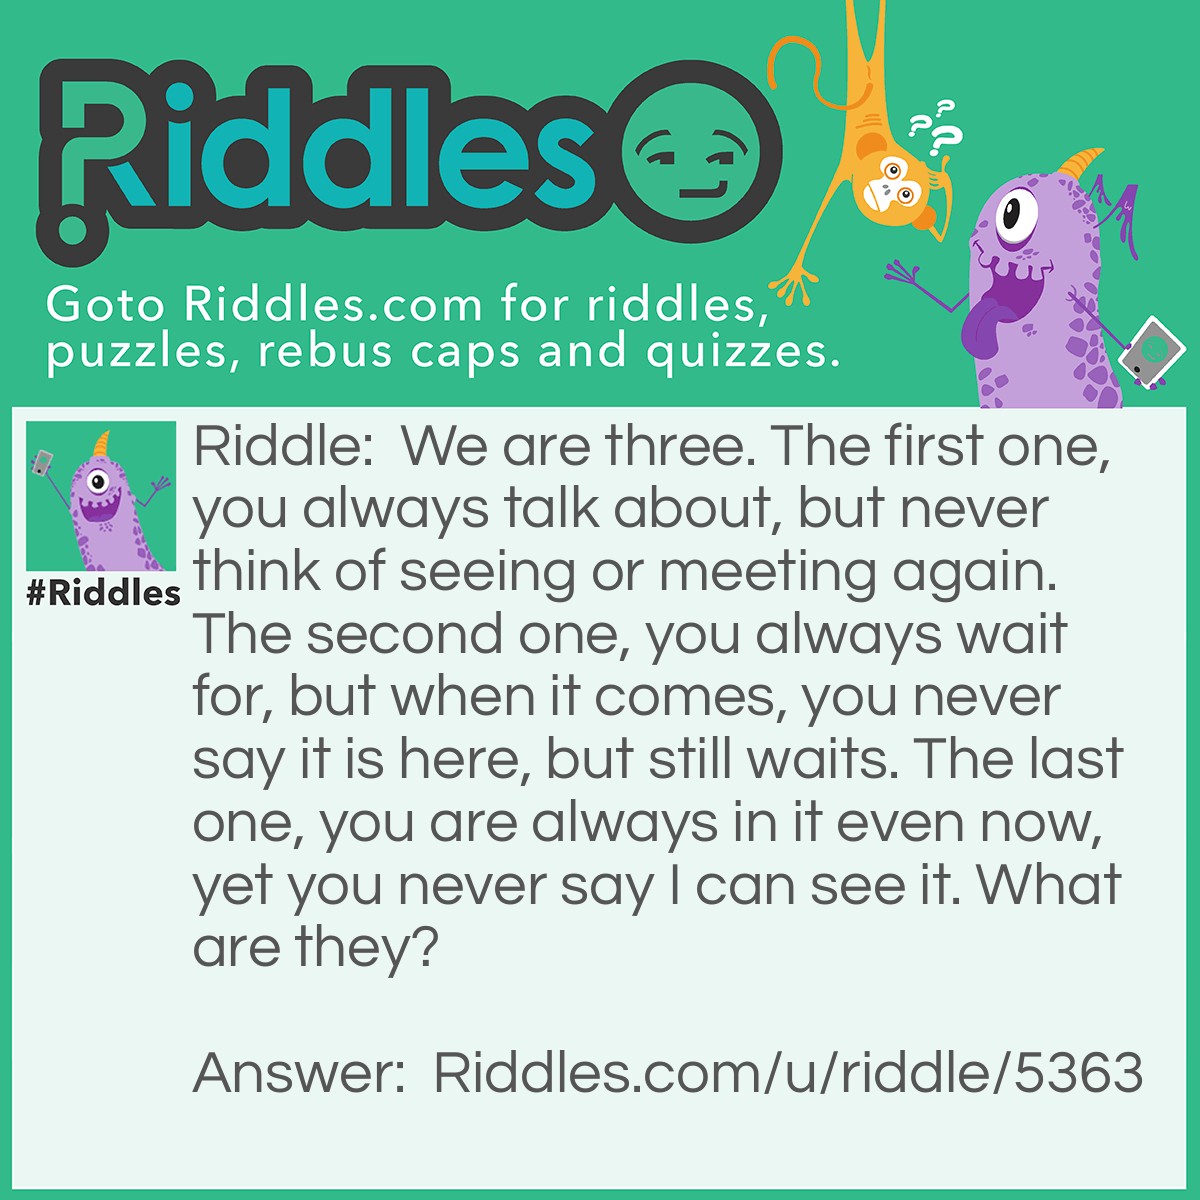 Riddle: We are three. The first one, you always talk about, but never think of seeing or meeting again. The second one, you always wait for, but when it comes, you never say it is here, but still waits. The last one, you are always in it even now, yet you never say I can see it. What are they? Answer: Yesterday, Tomorrow, and Today.